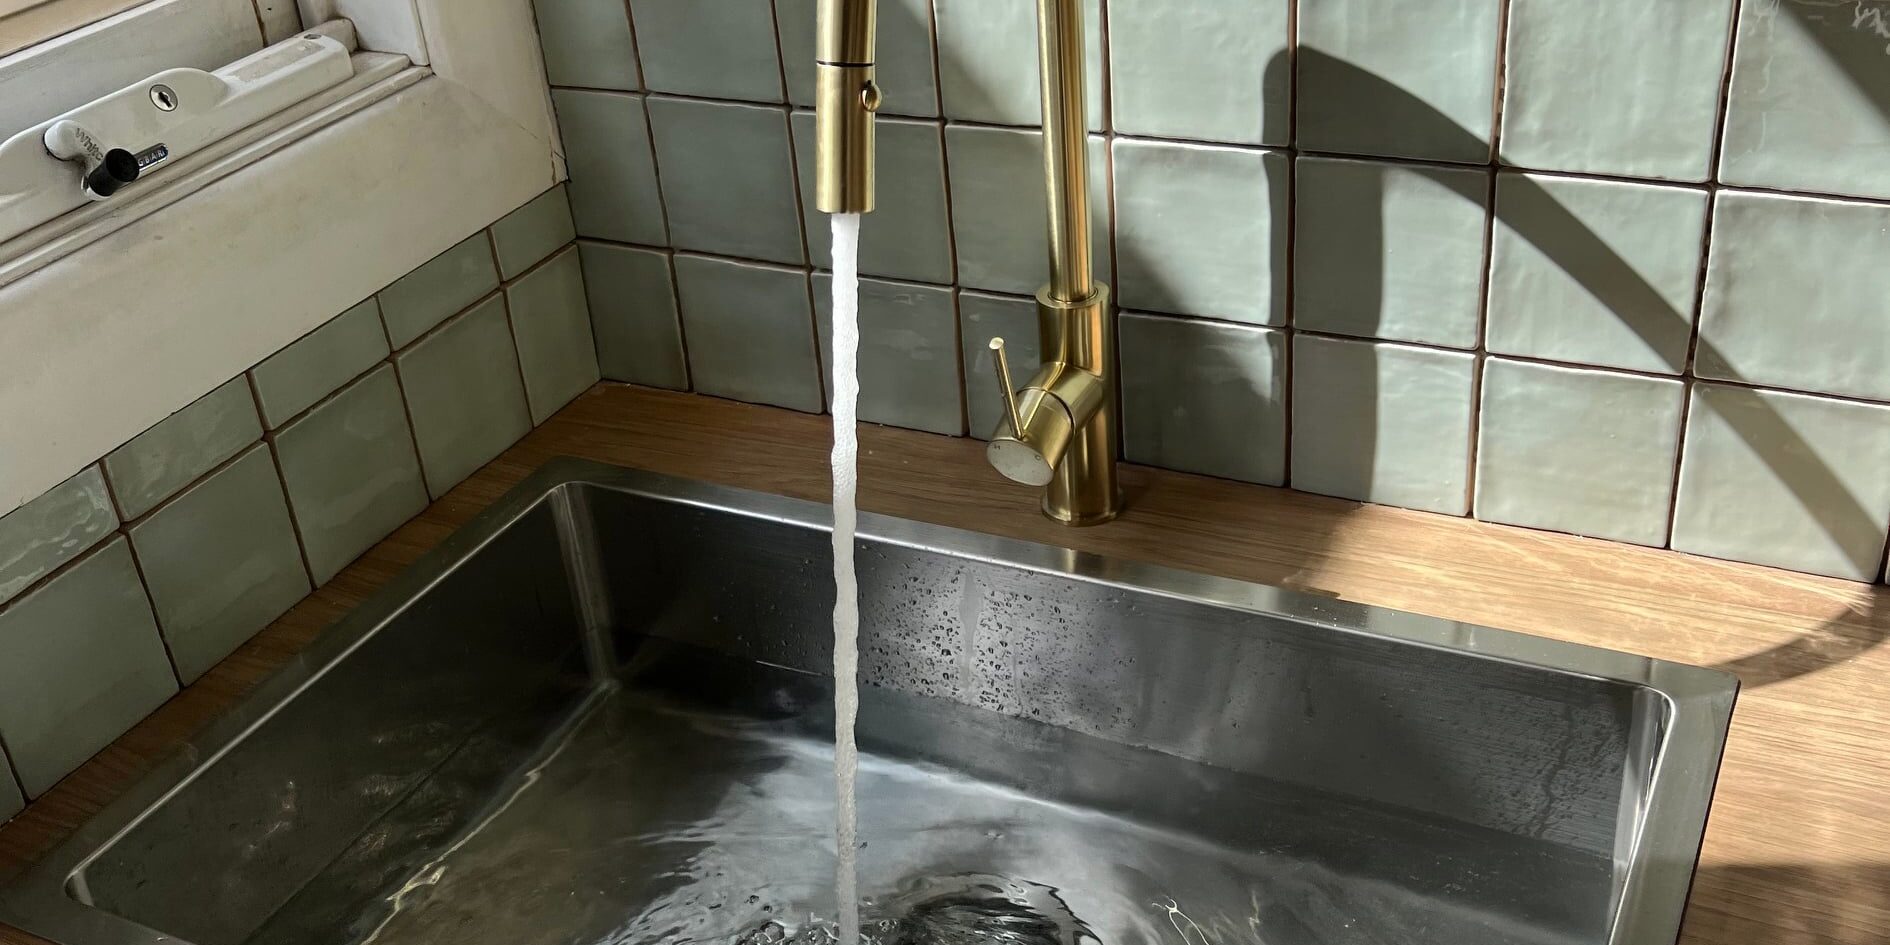 Gold Tap Faucet Running Water into a chrome sink that is filled with water. Blockages Tiles